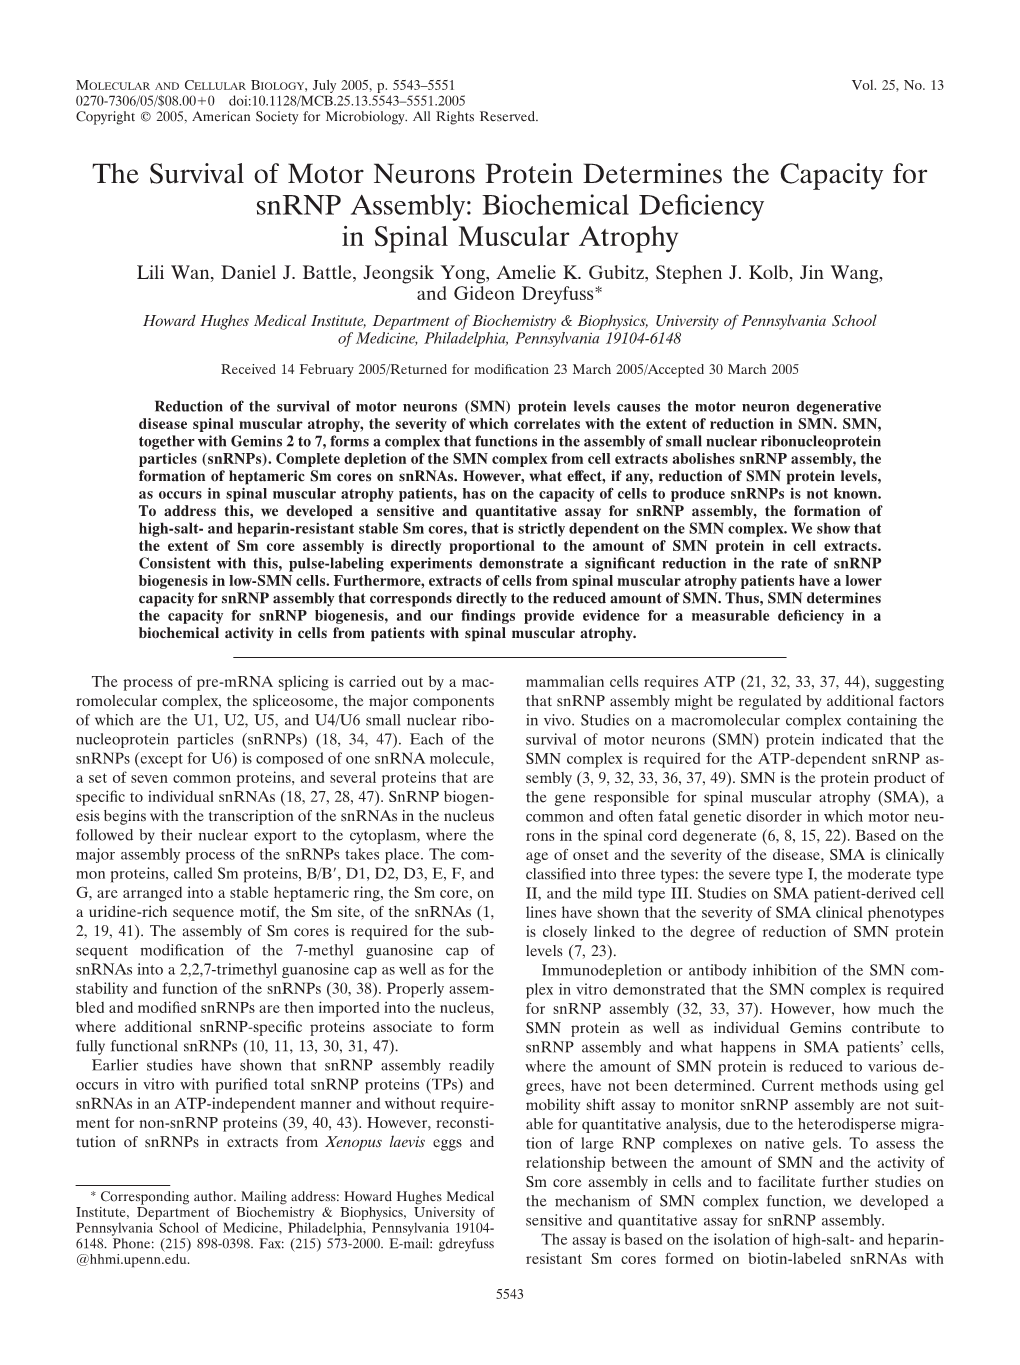 Biochemical Deficiency in Spinal Muscular Atrophy 5545